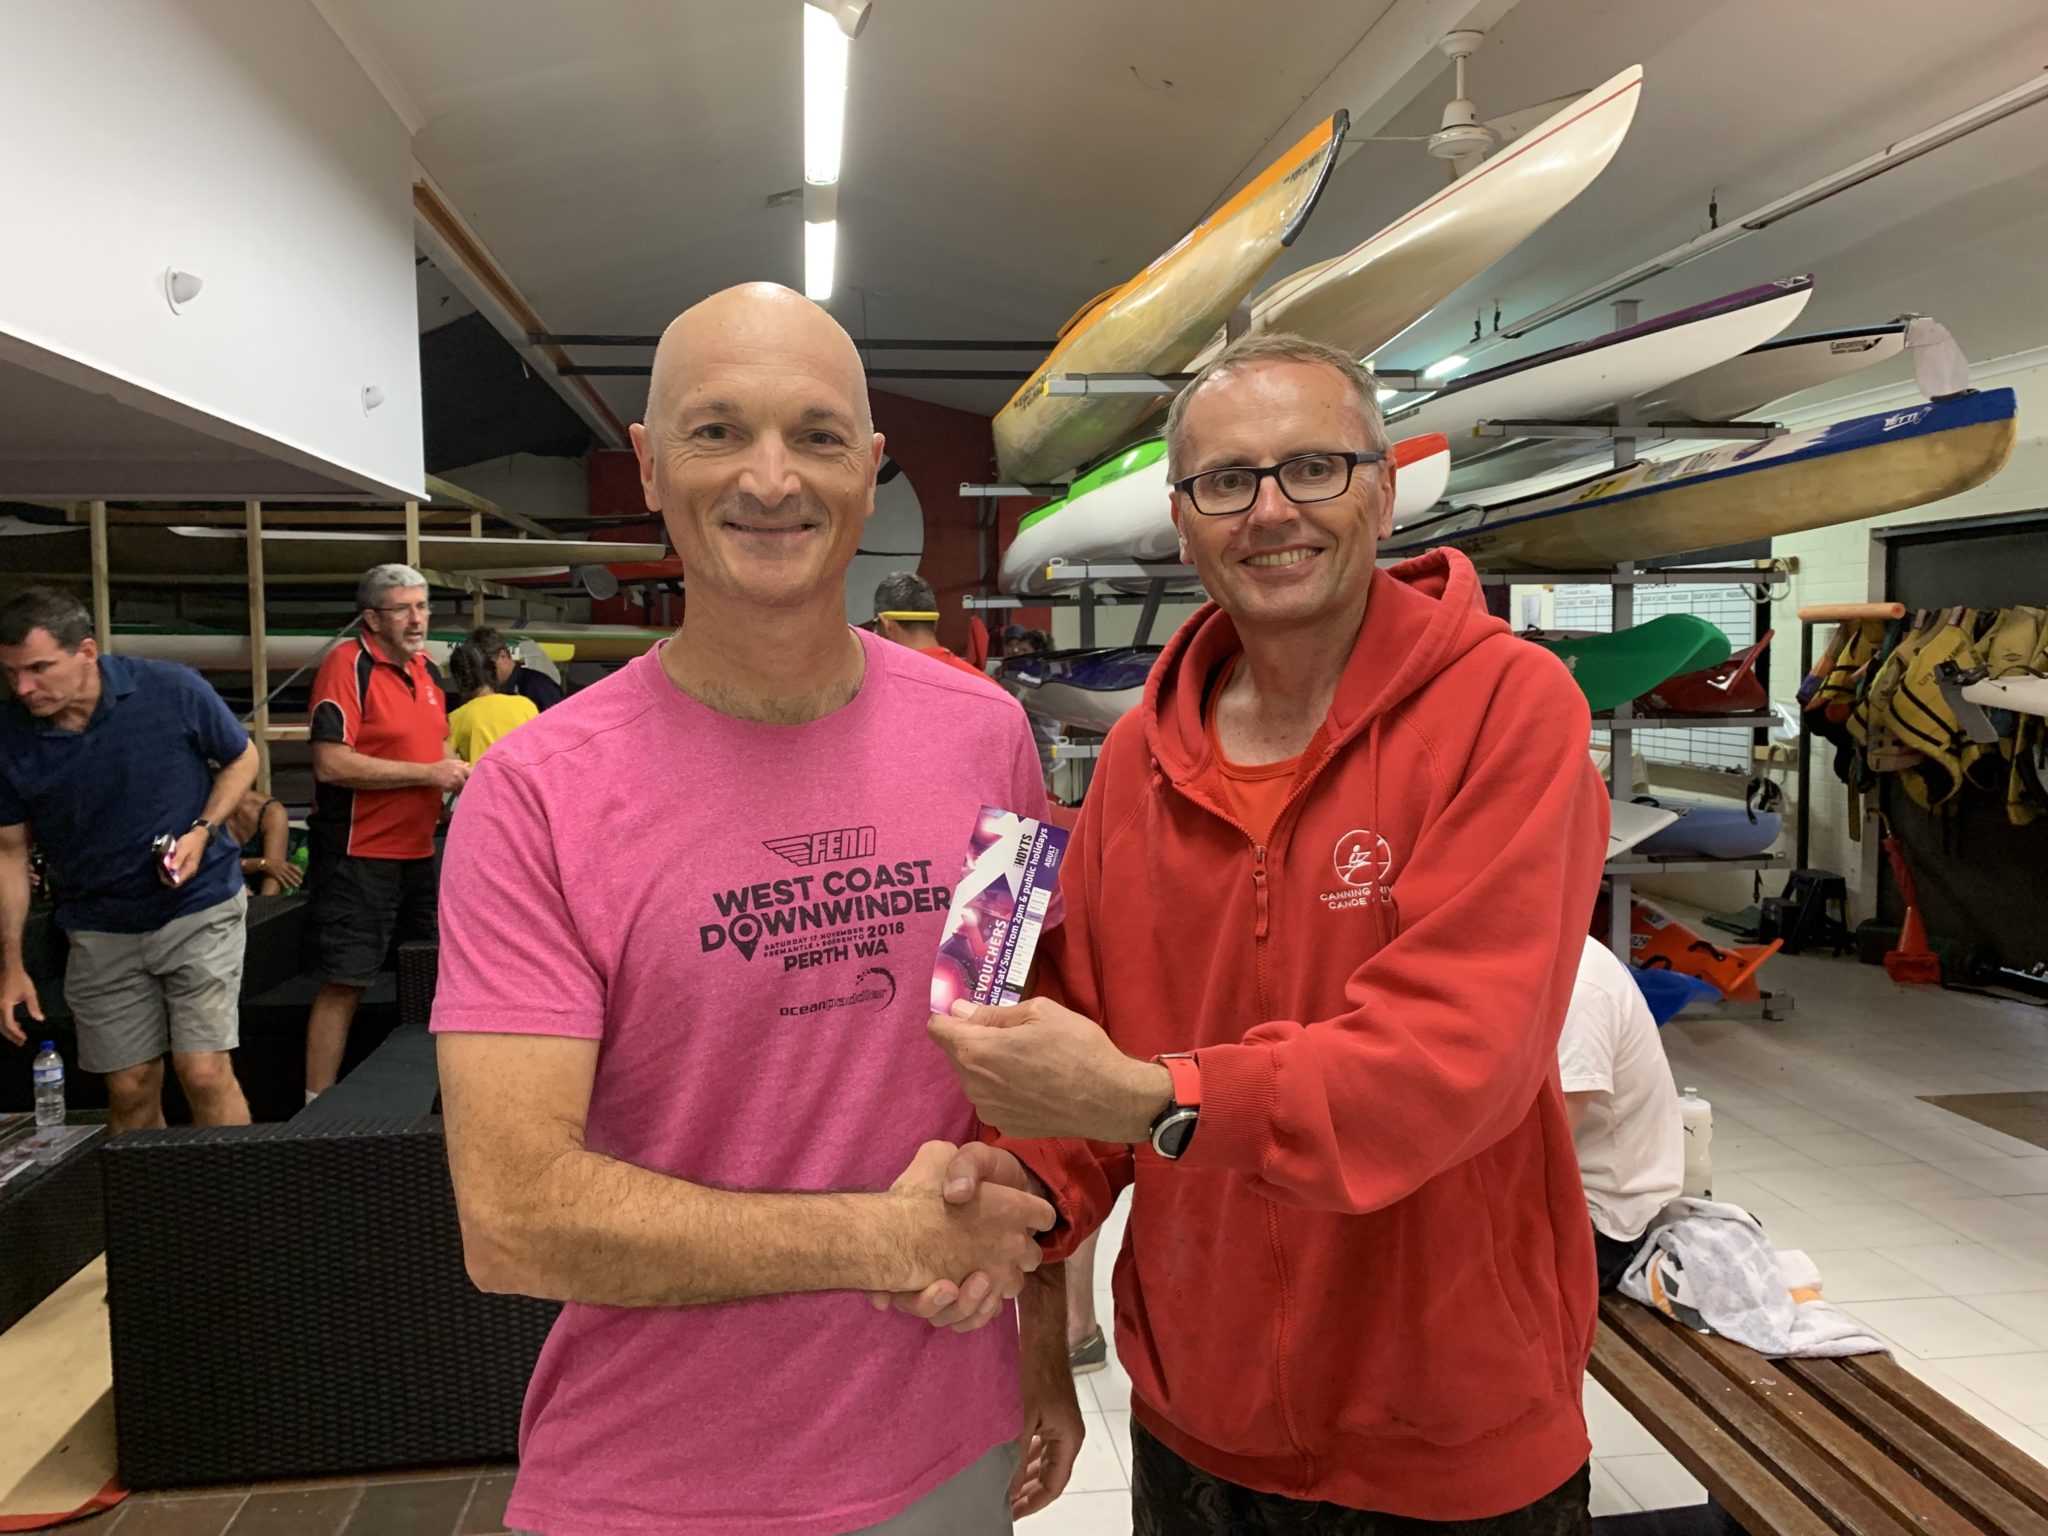 Tuesday 15th January 2019 : Tonight’s photo shows club President Christian Thompson presenting Carlo Cottino with the winners movie voucher